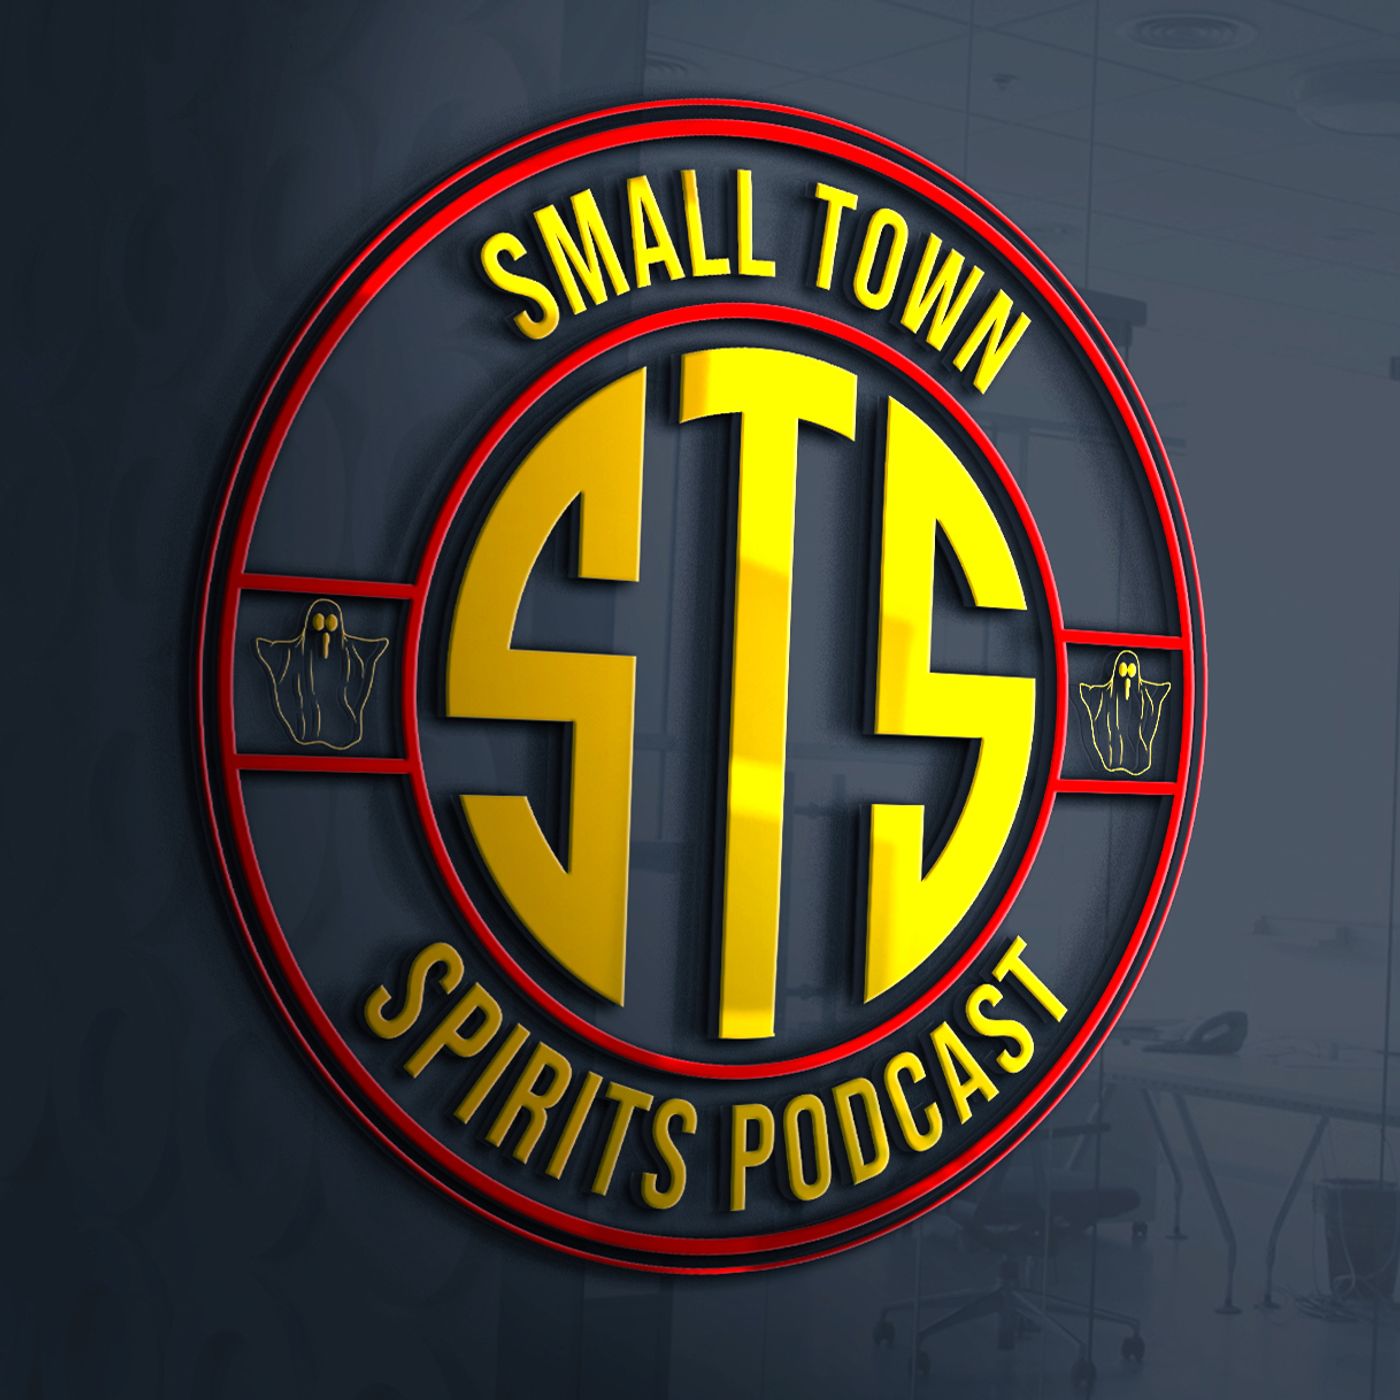 Small Town Spirits Podcast